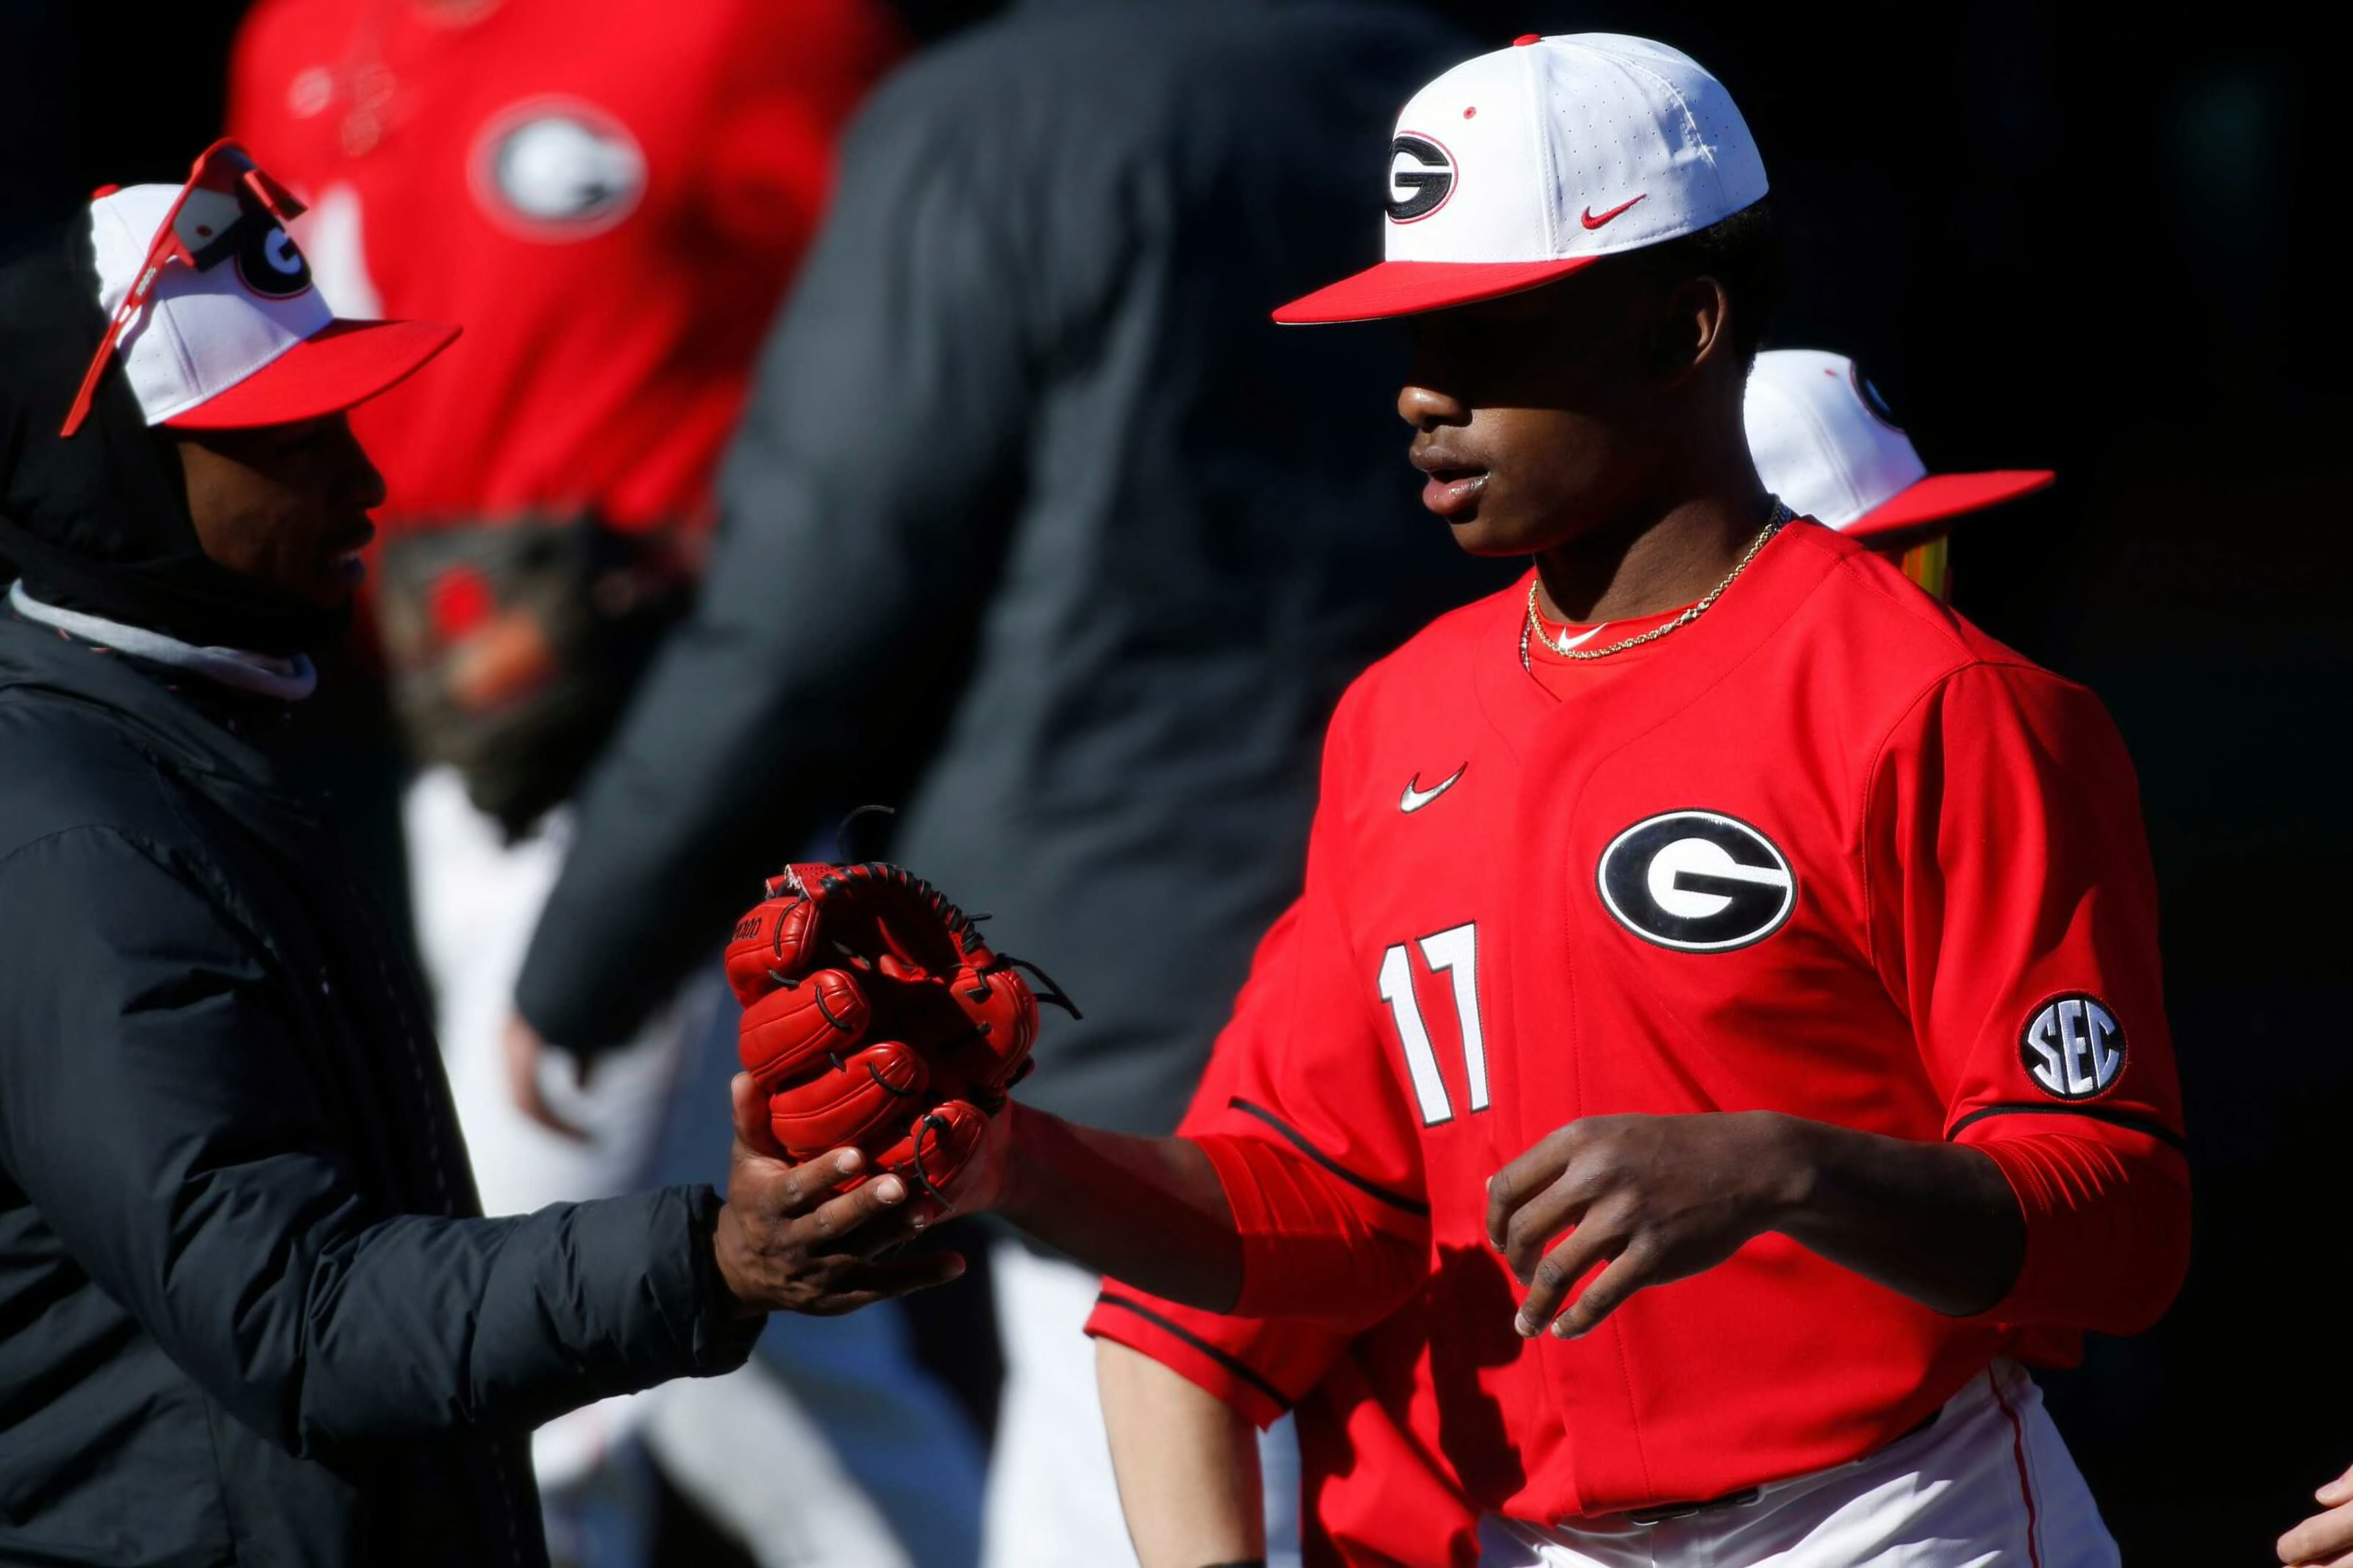 Three Georgia baseball players poised for breakouts in 2022 - Page 2